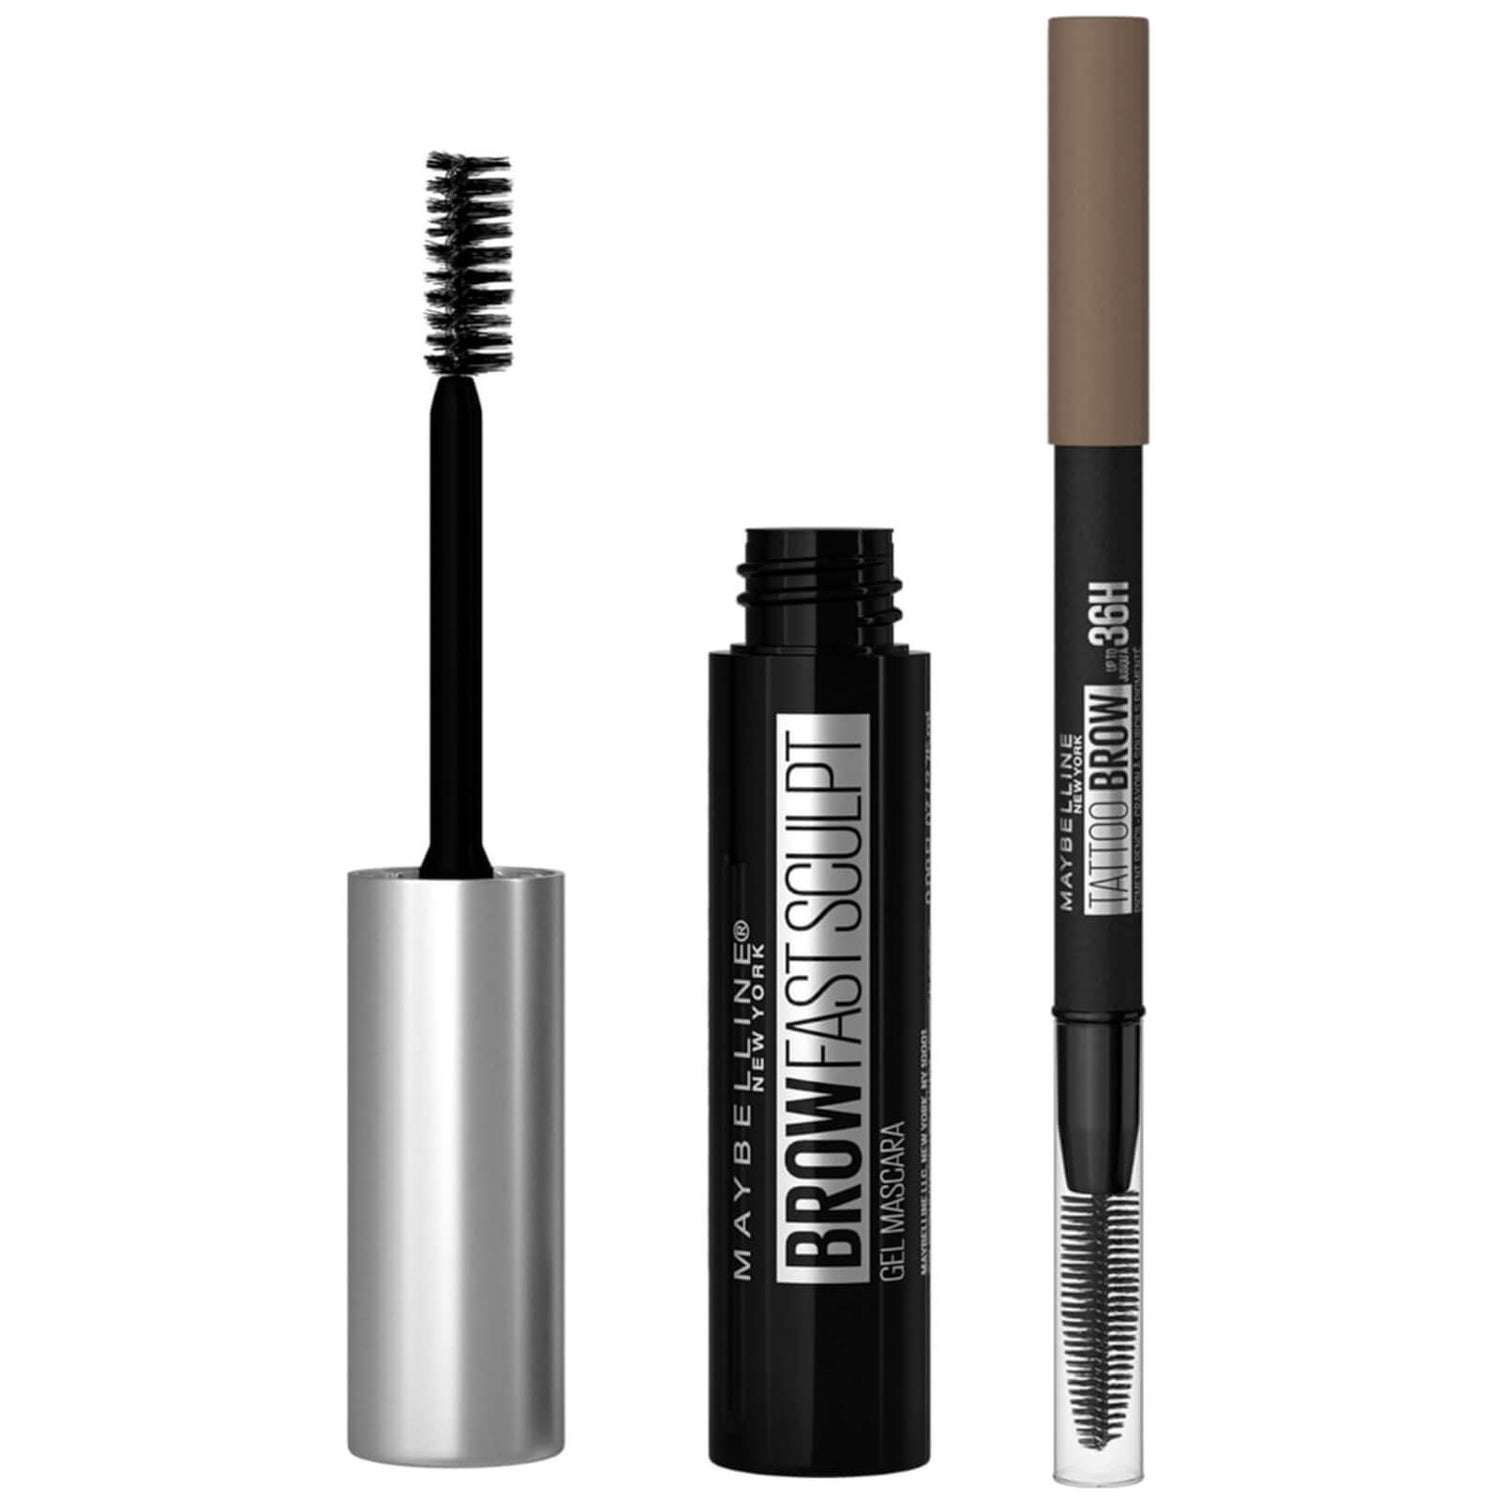 Maybelline Fill and Set Brow Bundle (Various Shades)